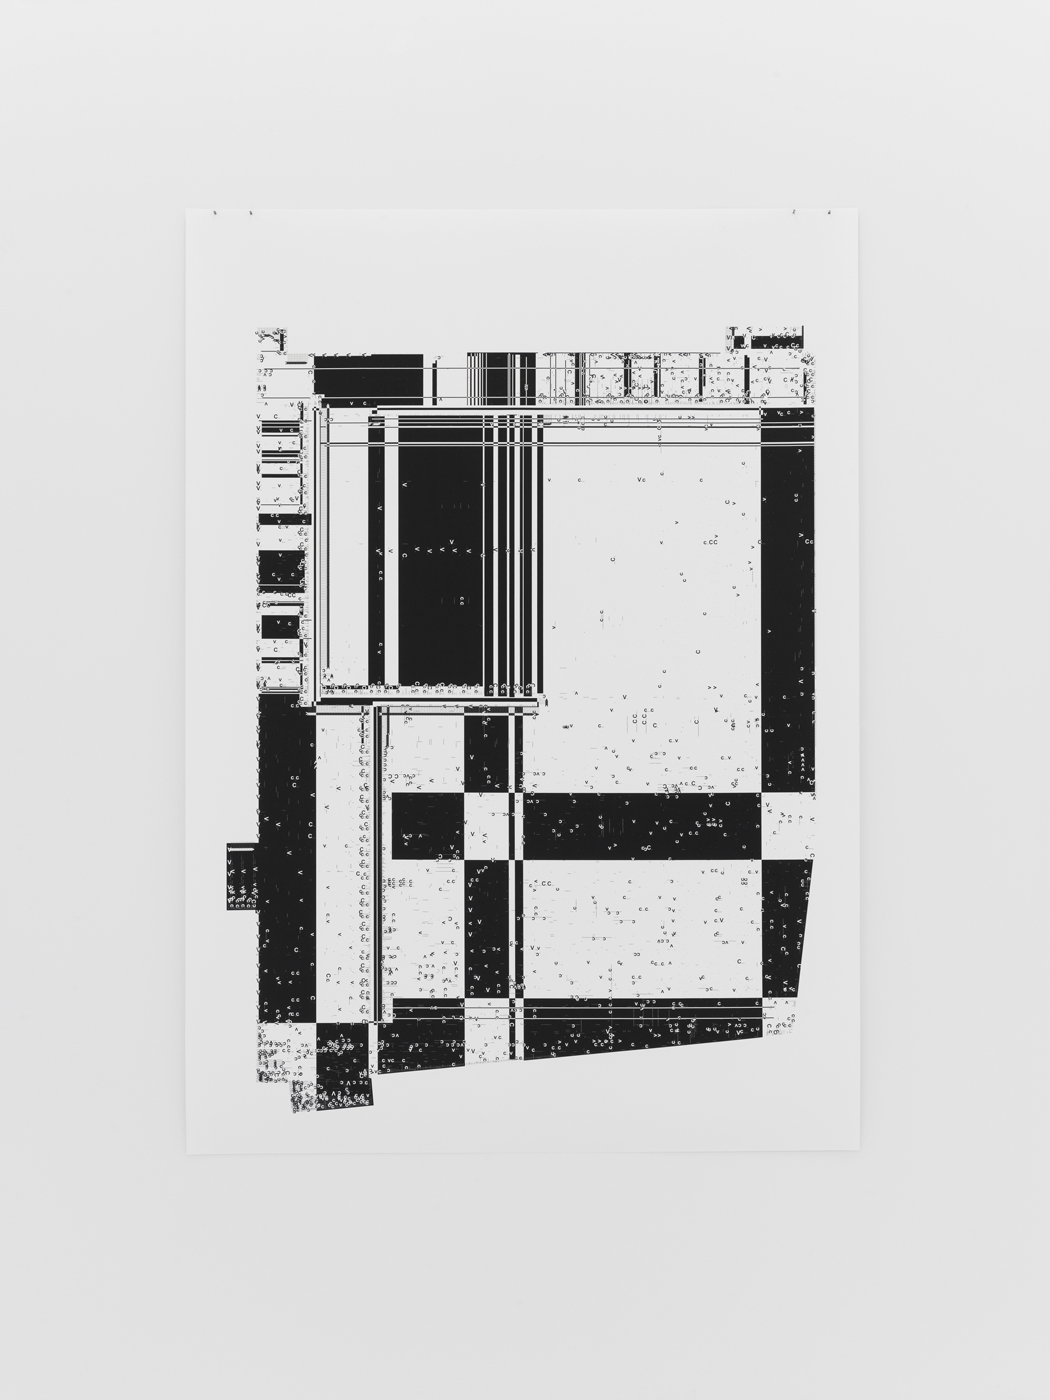 Untitled (Select_CV Floor Plan of Kunsthalle Zurich; black and white), Michael Riedel